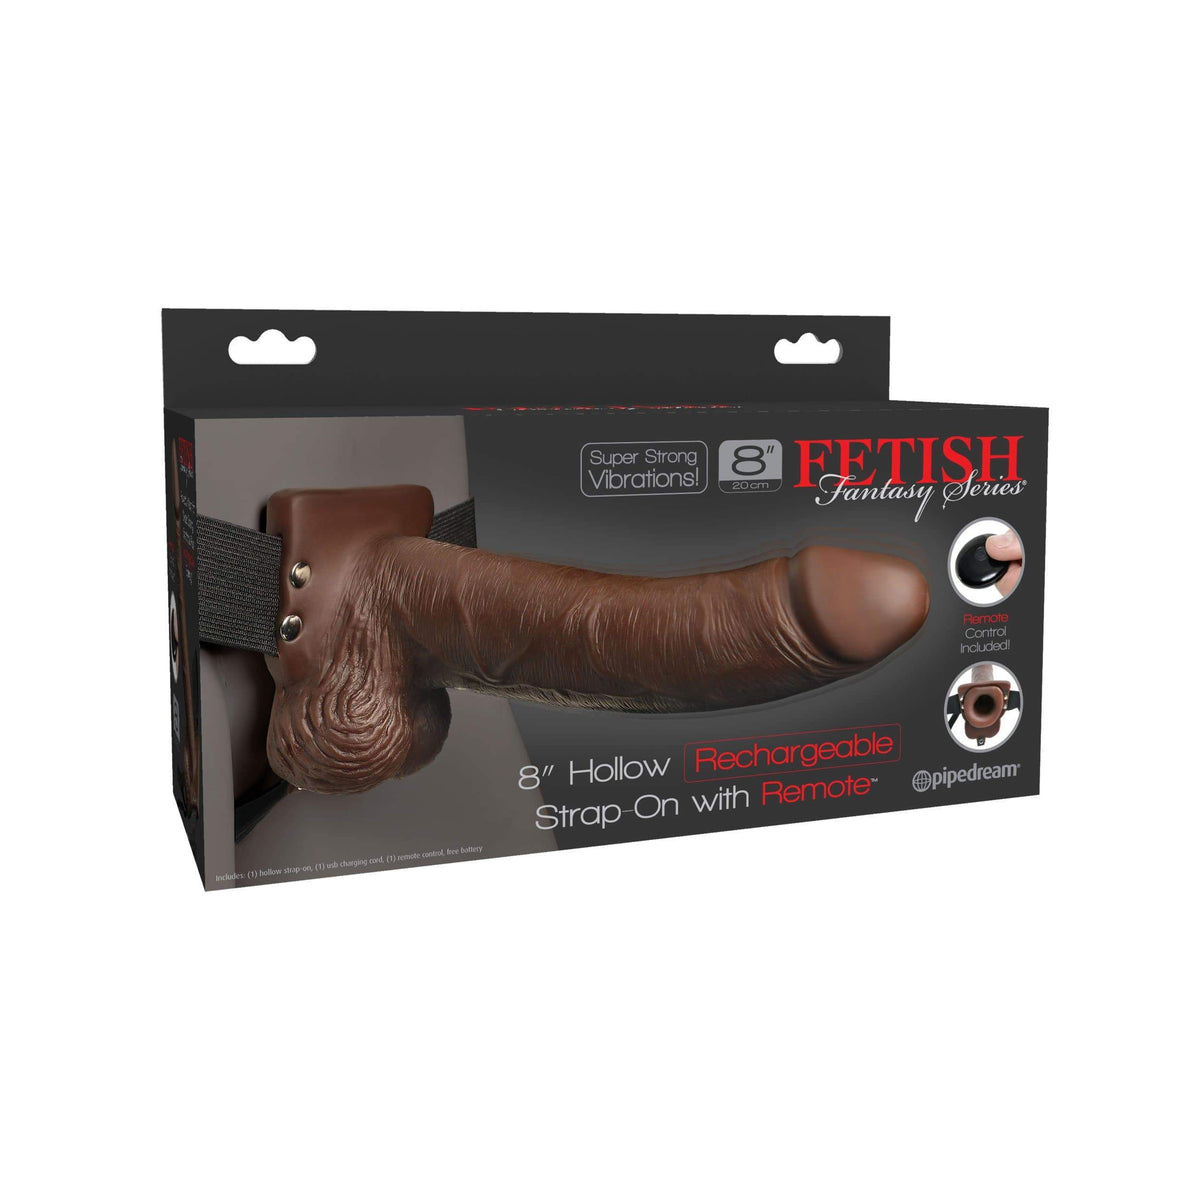 Pipedream - Fetish Fantasy Hollow Rechargeable Strap-On Remote 8&quot; (Brown) Strap On with Hollow Dildo for Male (Vibration) Non Rechargeable 603912759242 CherryAffairs